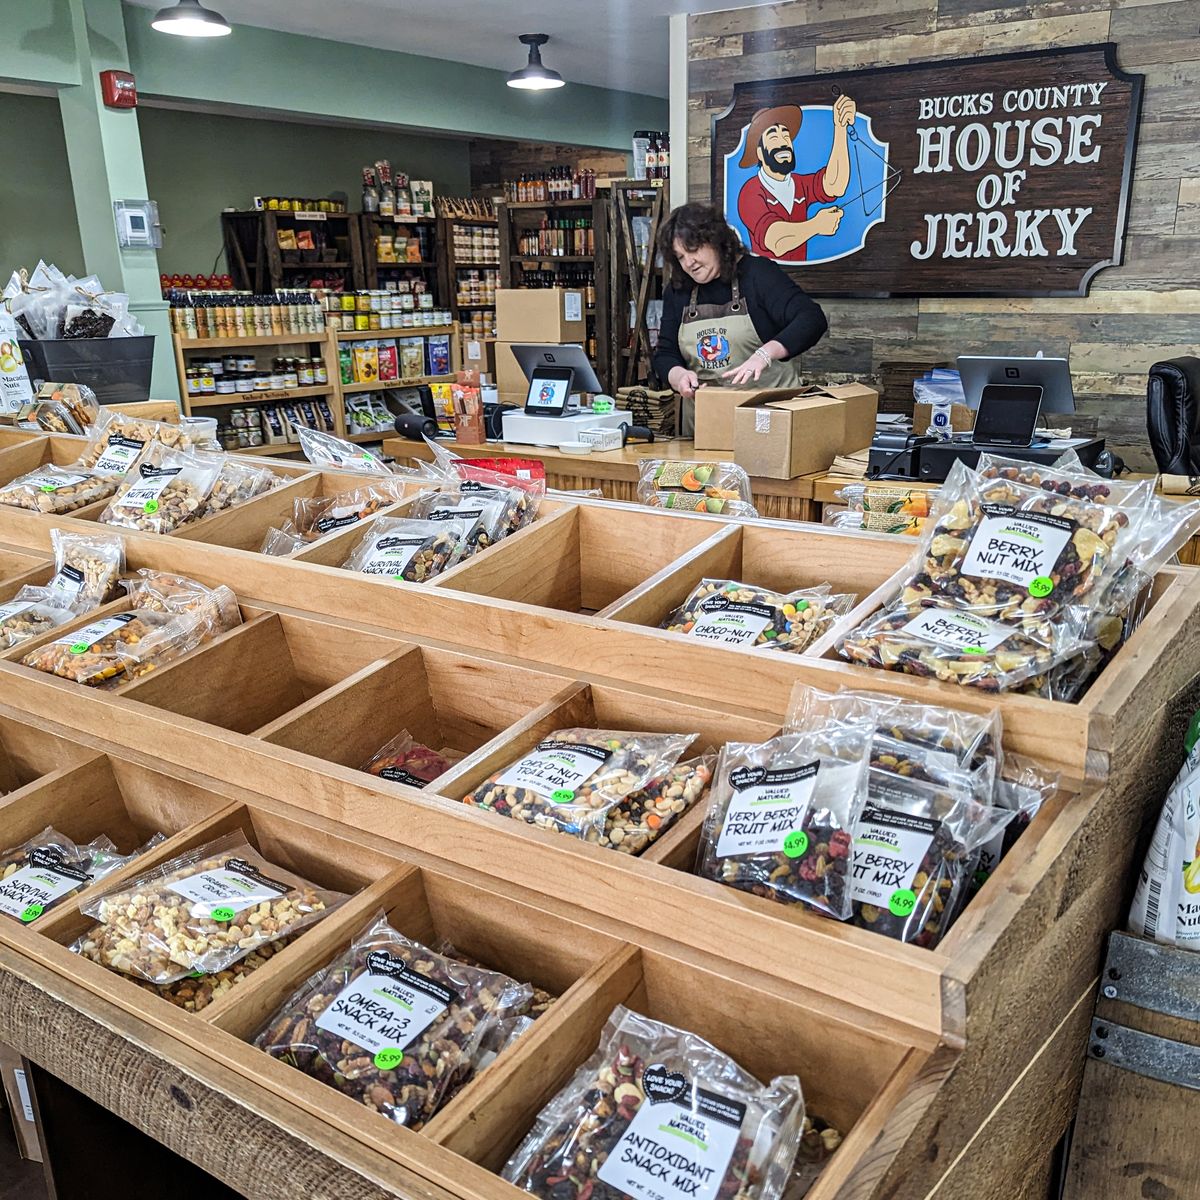 Packing up orders at Bucks County House of Jerky